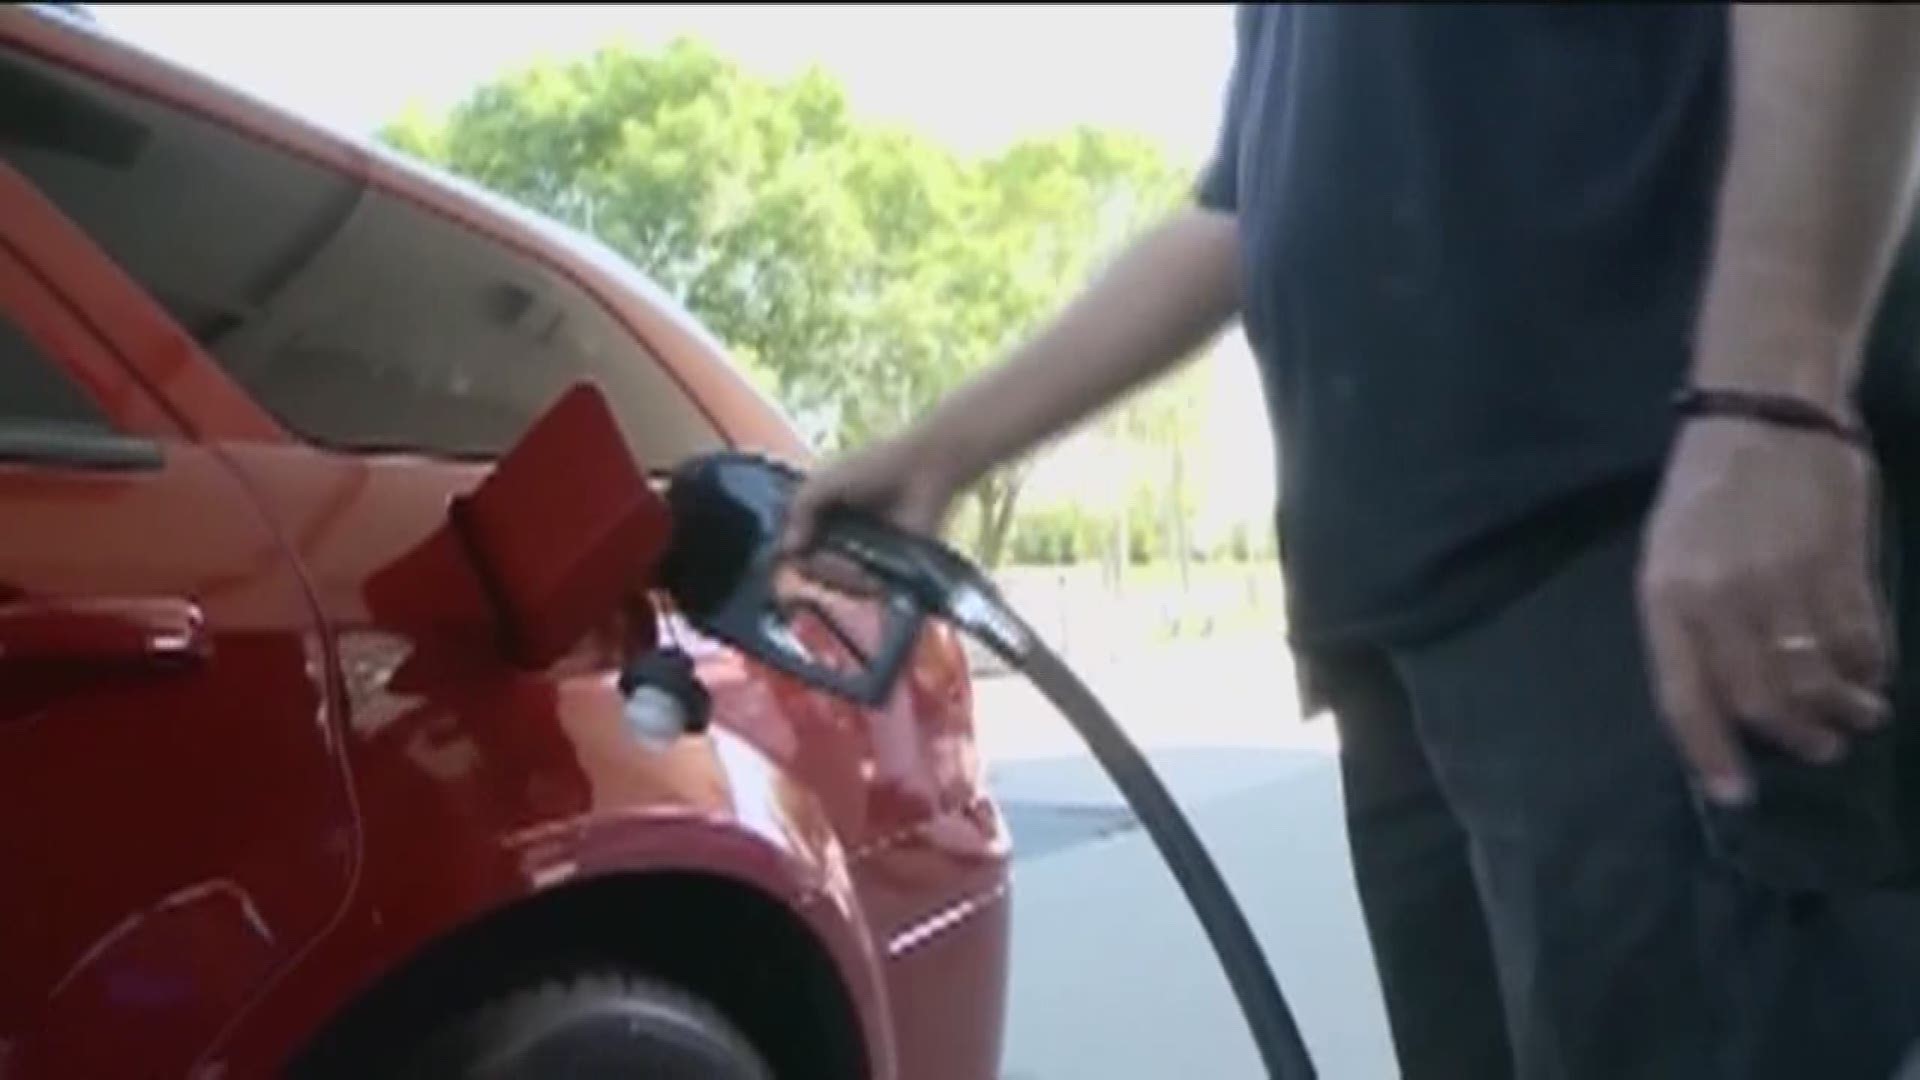 GasBuddy.com predicts gas in California could soon hit $4 a gallon within the next two weeks.